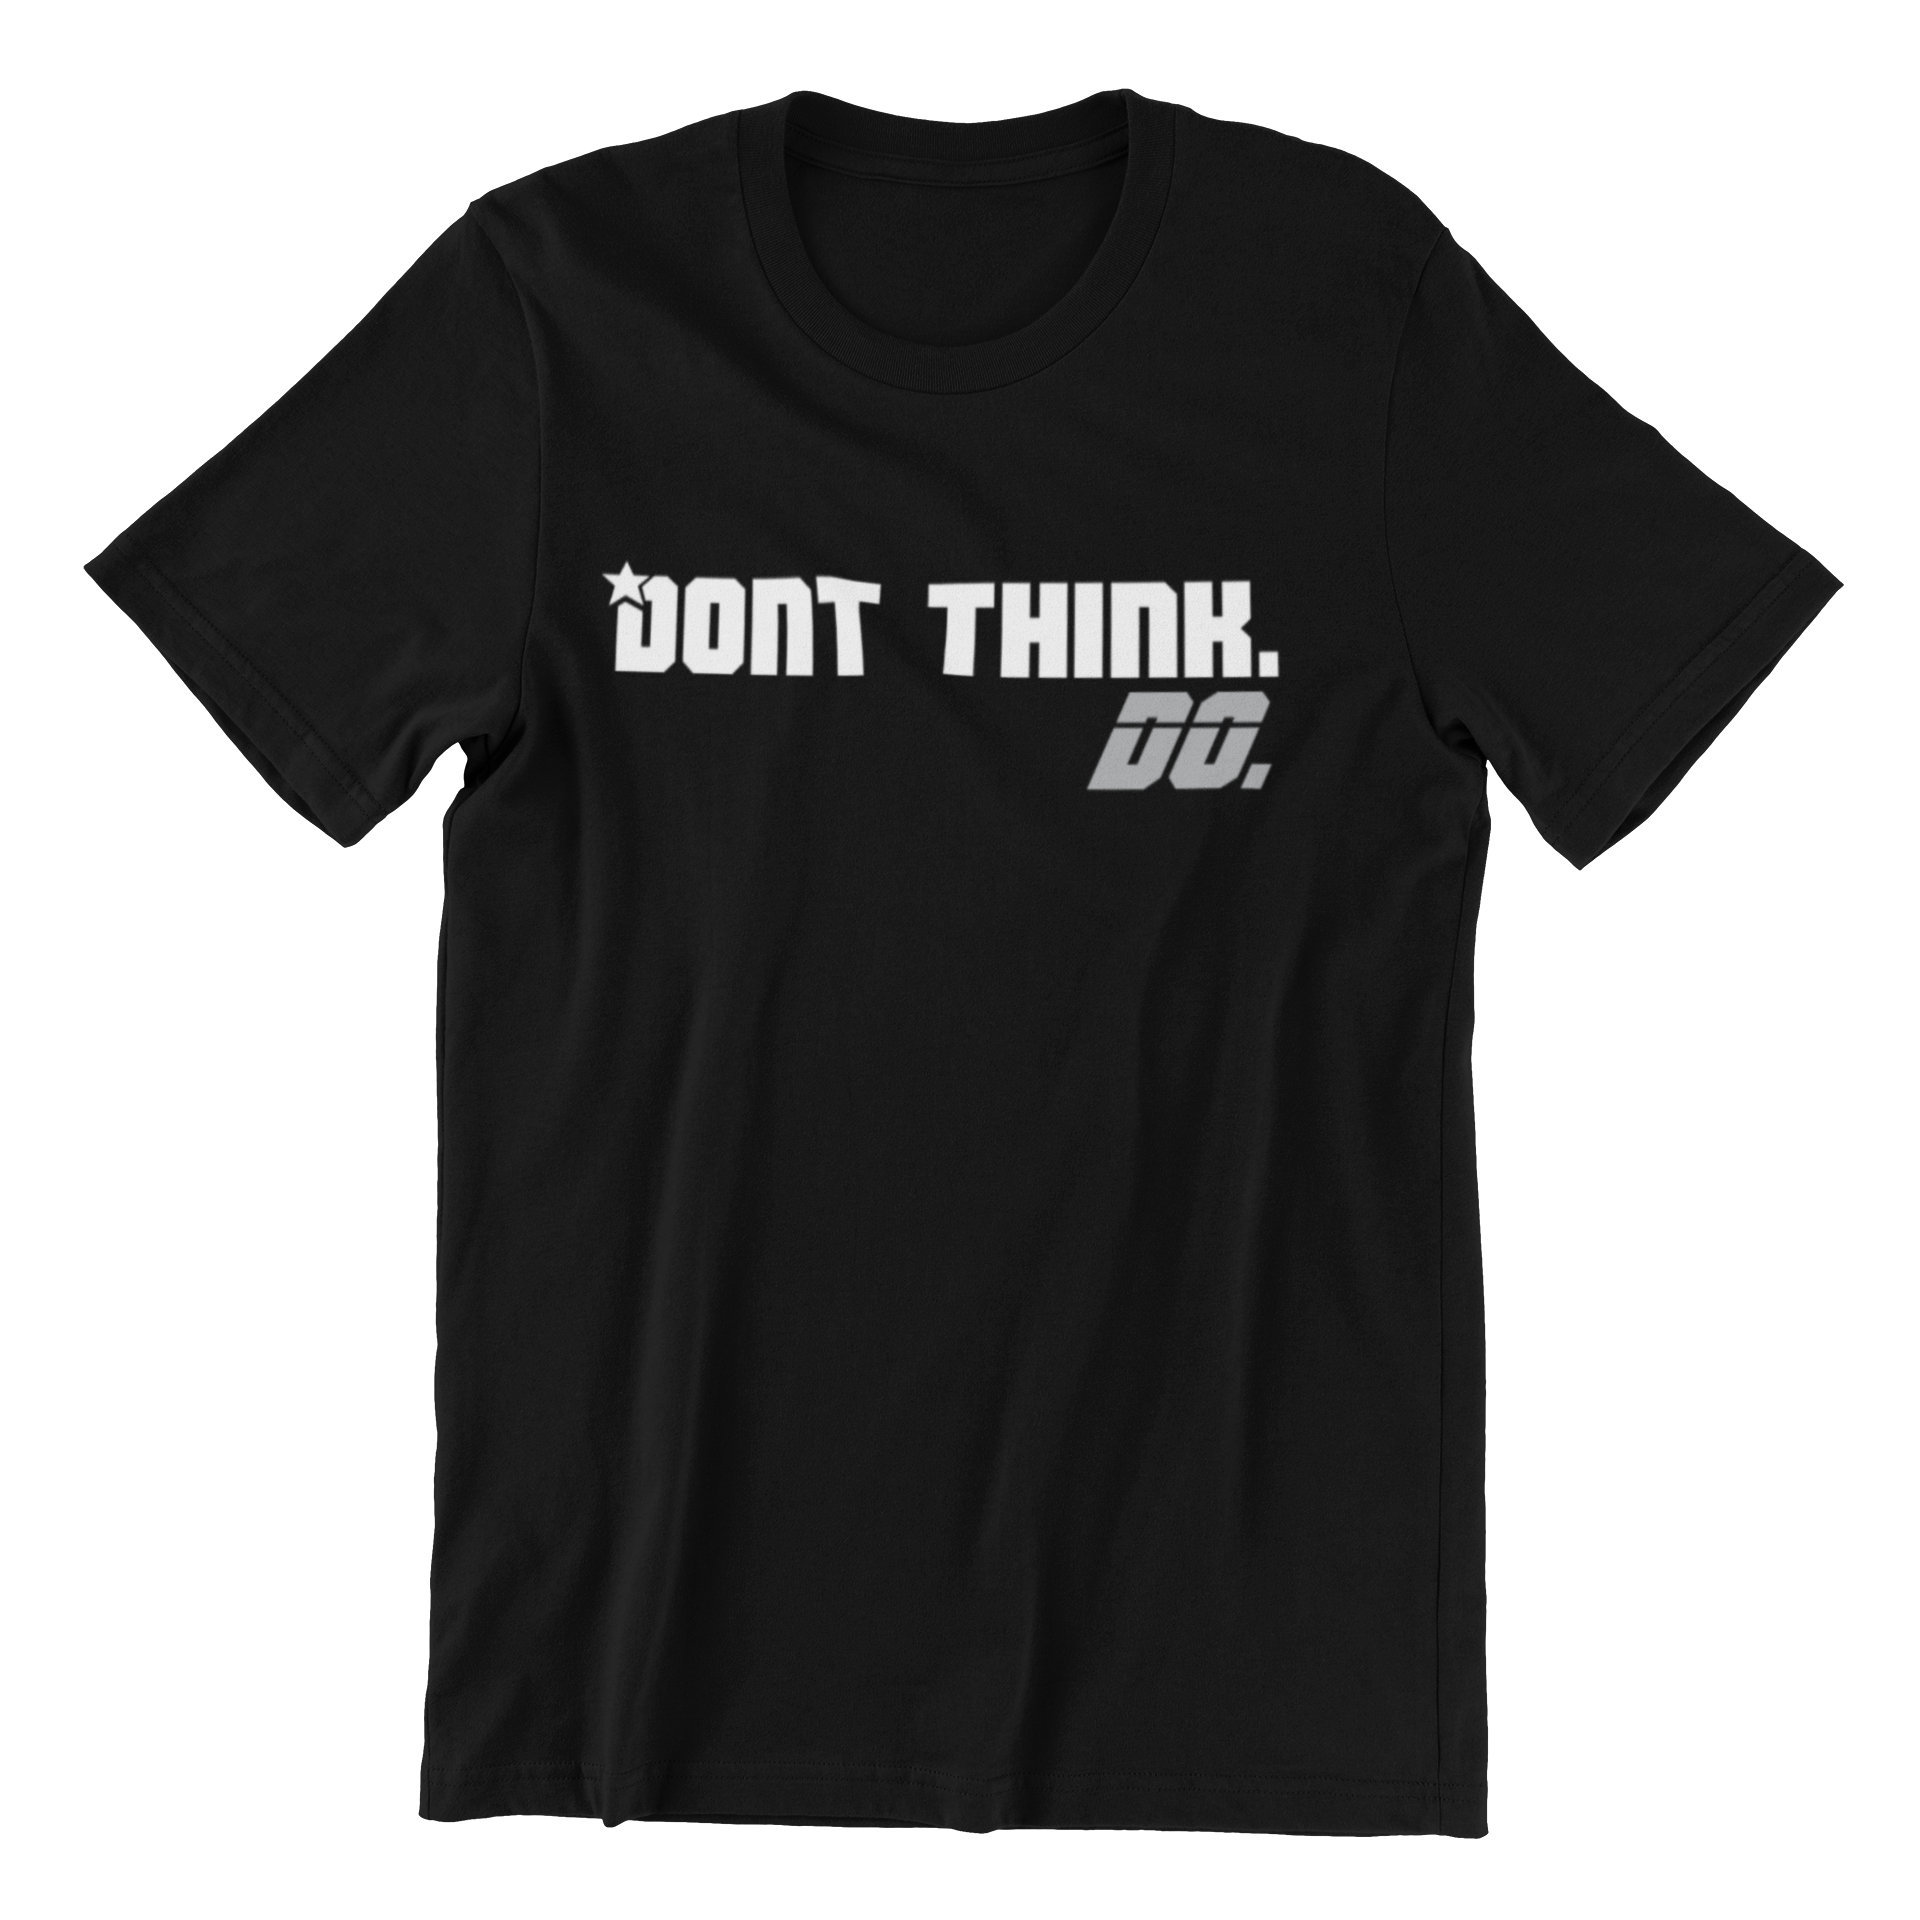 Jocko Willink Inspired Graphic T Shirt Dont Think. Do. Mens | Etsy